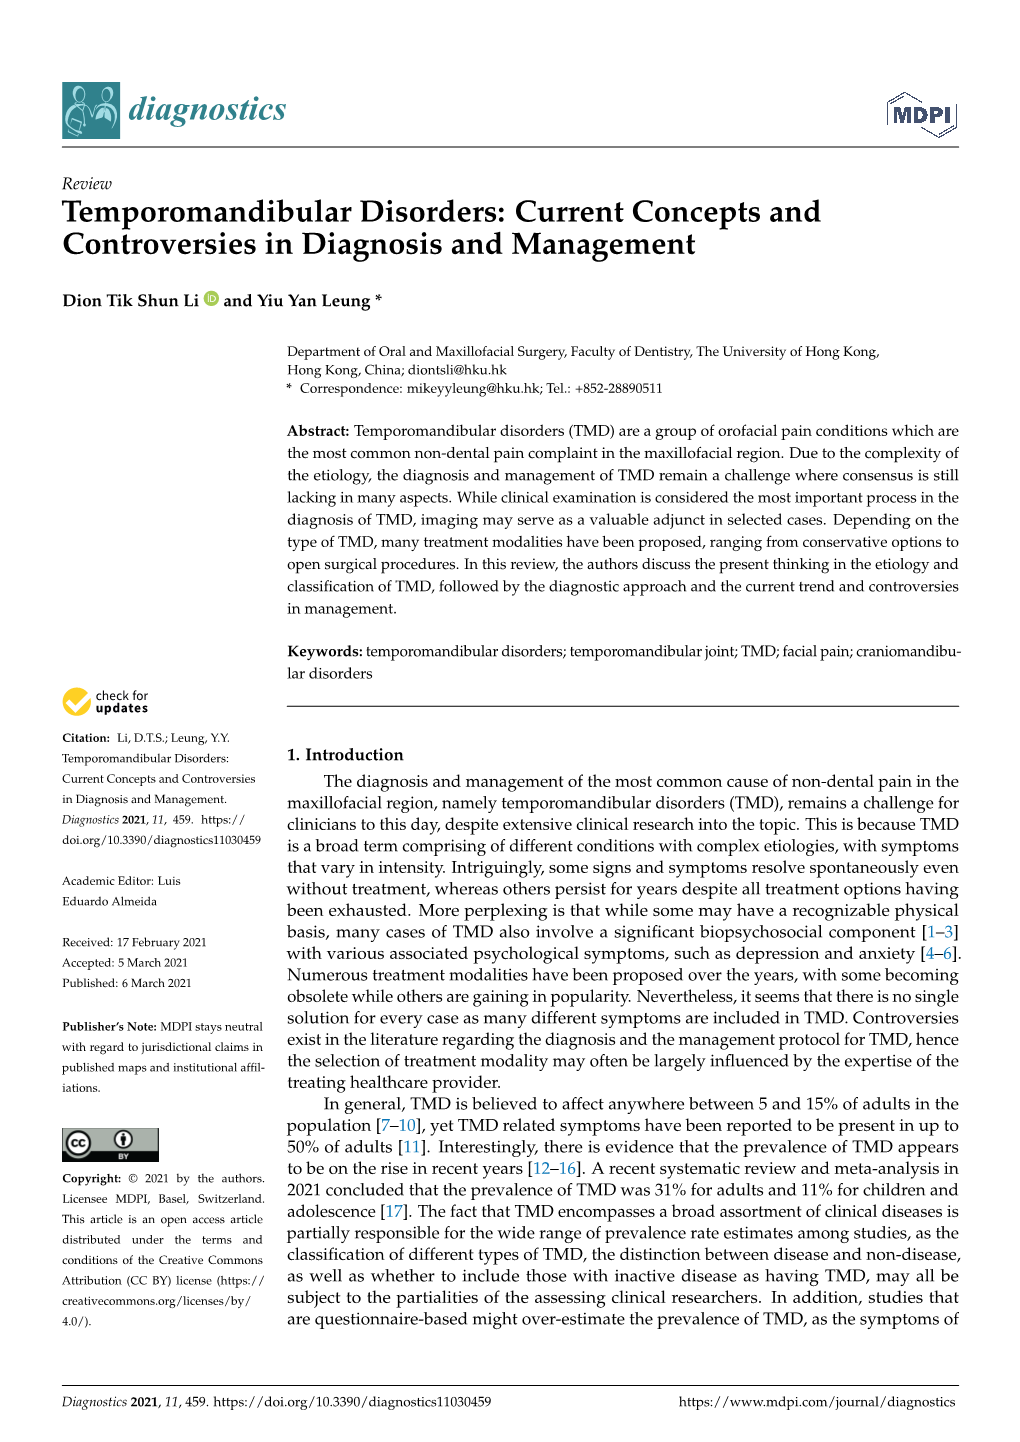 Temporomandibular Disorders: Current Concepts and Controversies in Diagnosis and Management